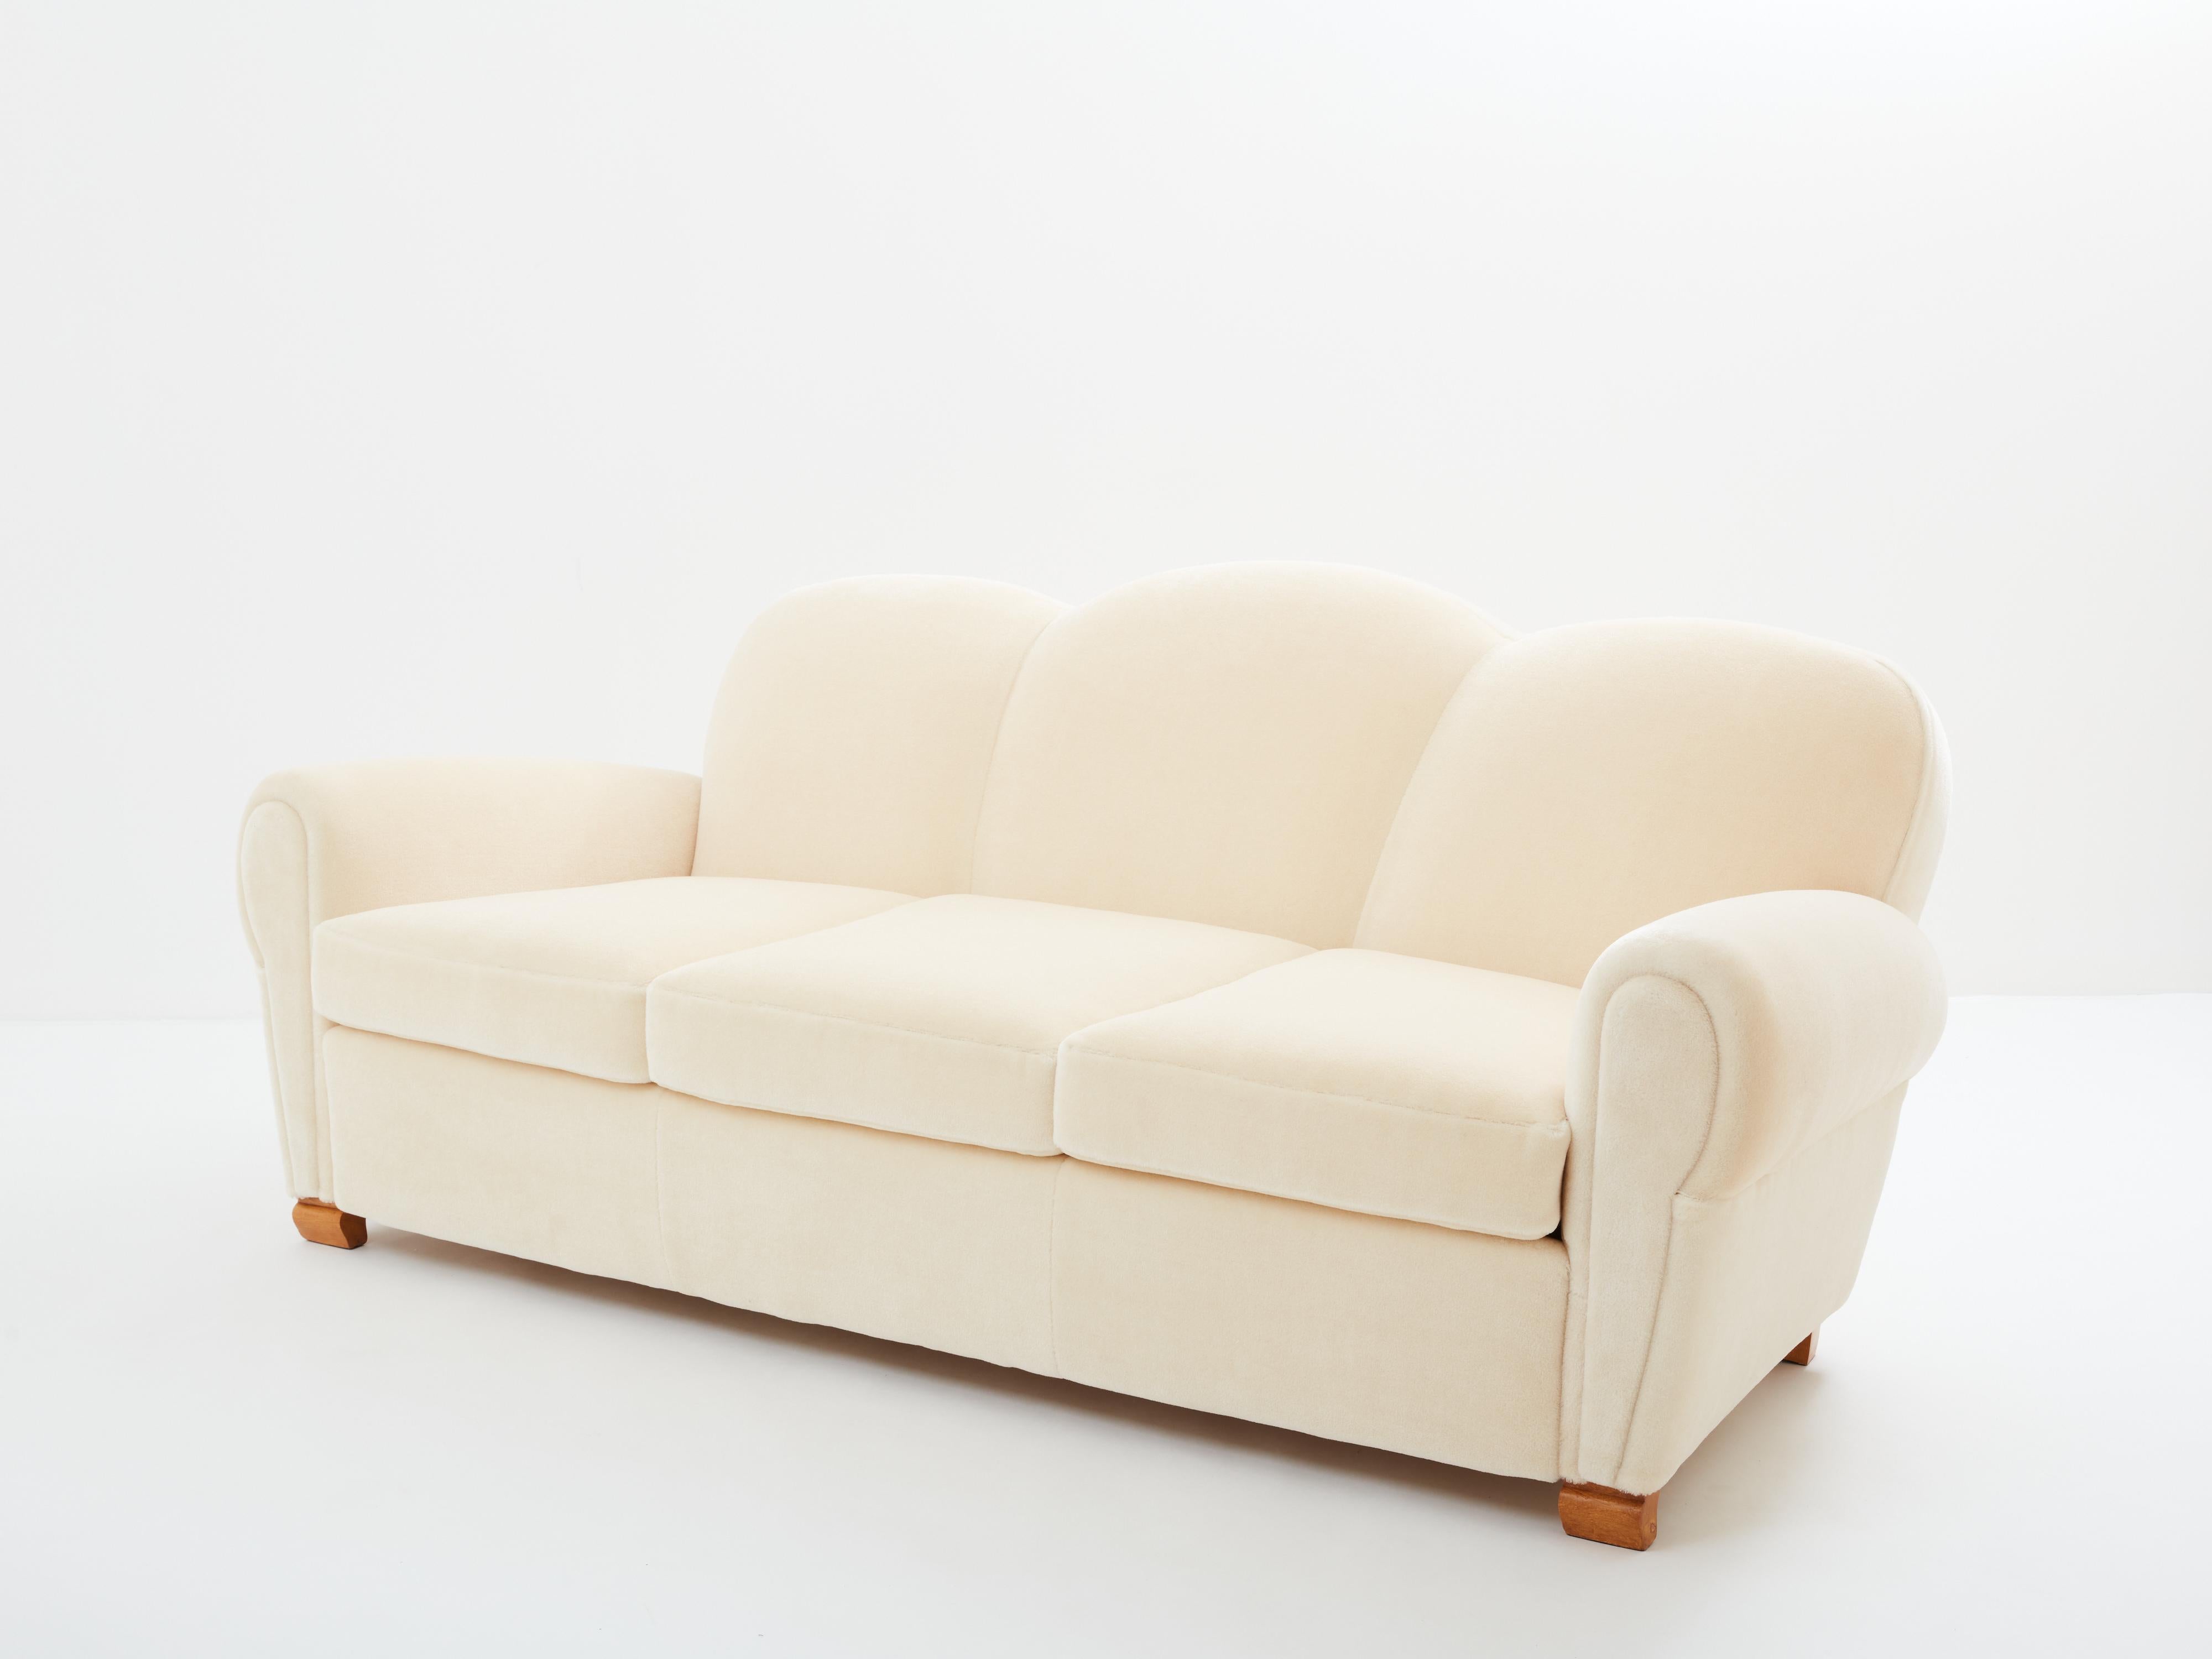 This beautiful sofa designed by Jules Leleu around 1945 embodies the smooth lines of the art deco living room sets that came on the market in the early 1930s. The smooth and round lines are a thing of beauty, finished with curved oak feet, one of